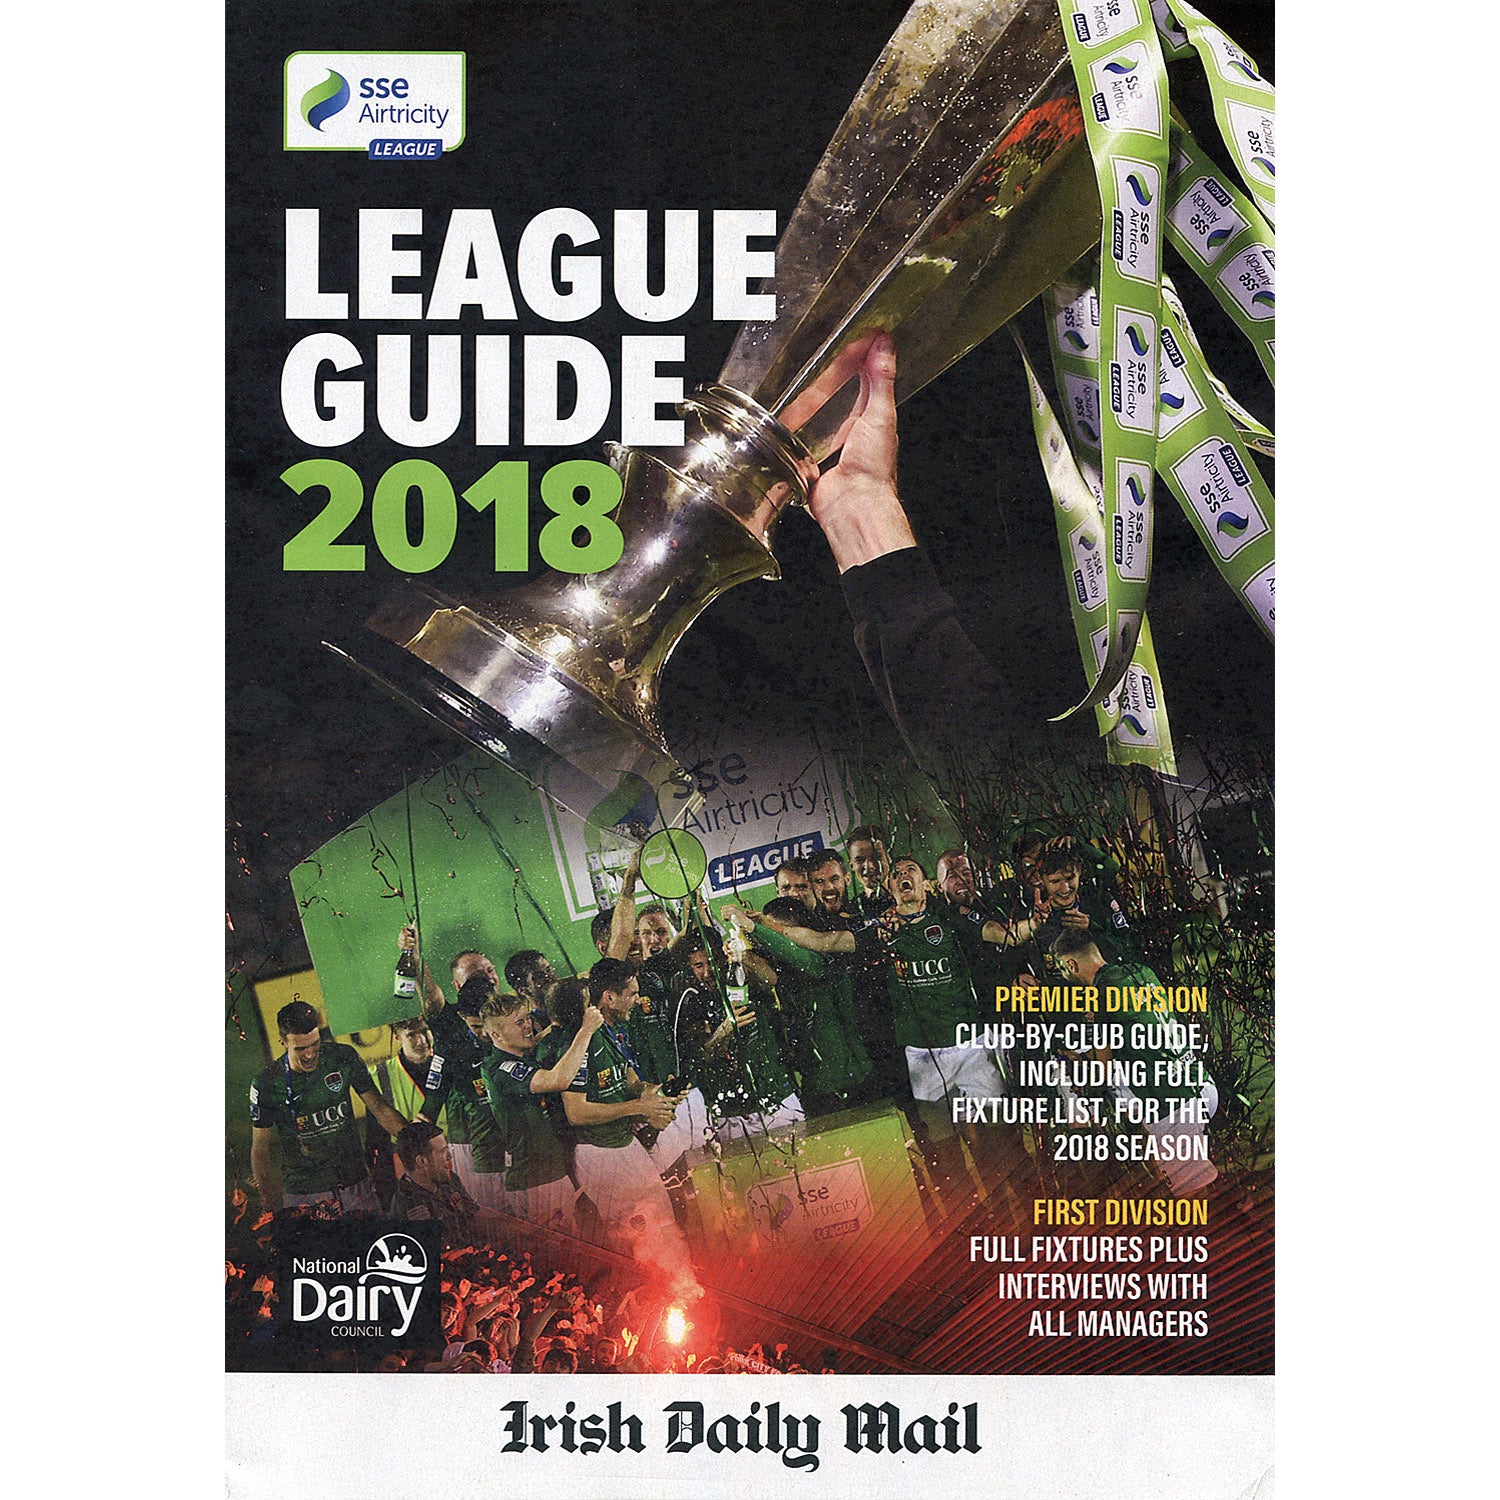 SSE Airtricity League Guide 2018 (Ireland Season Preview)